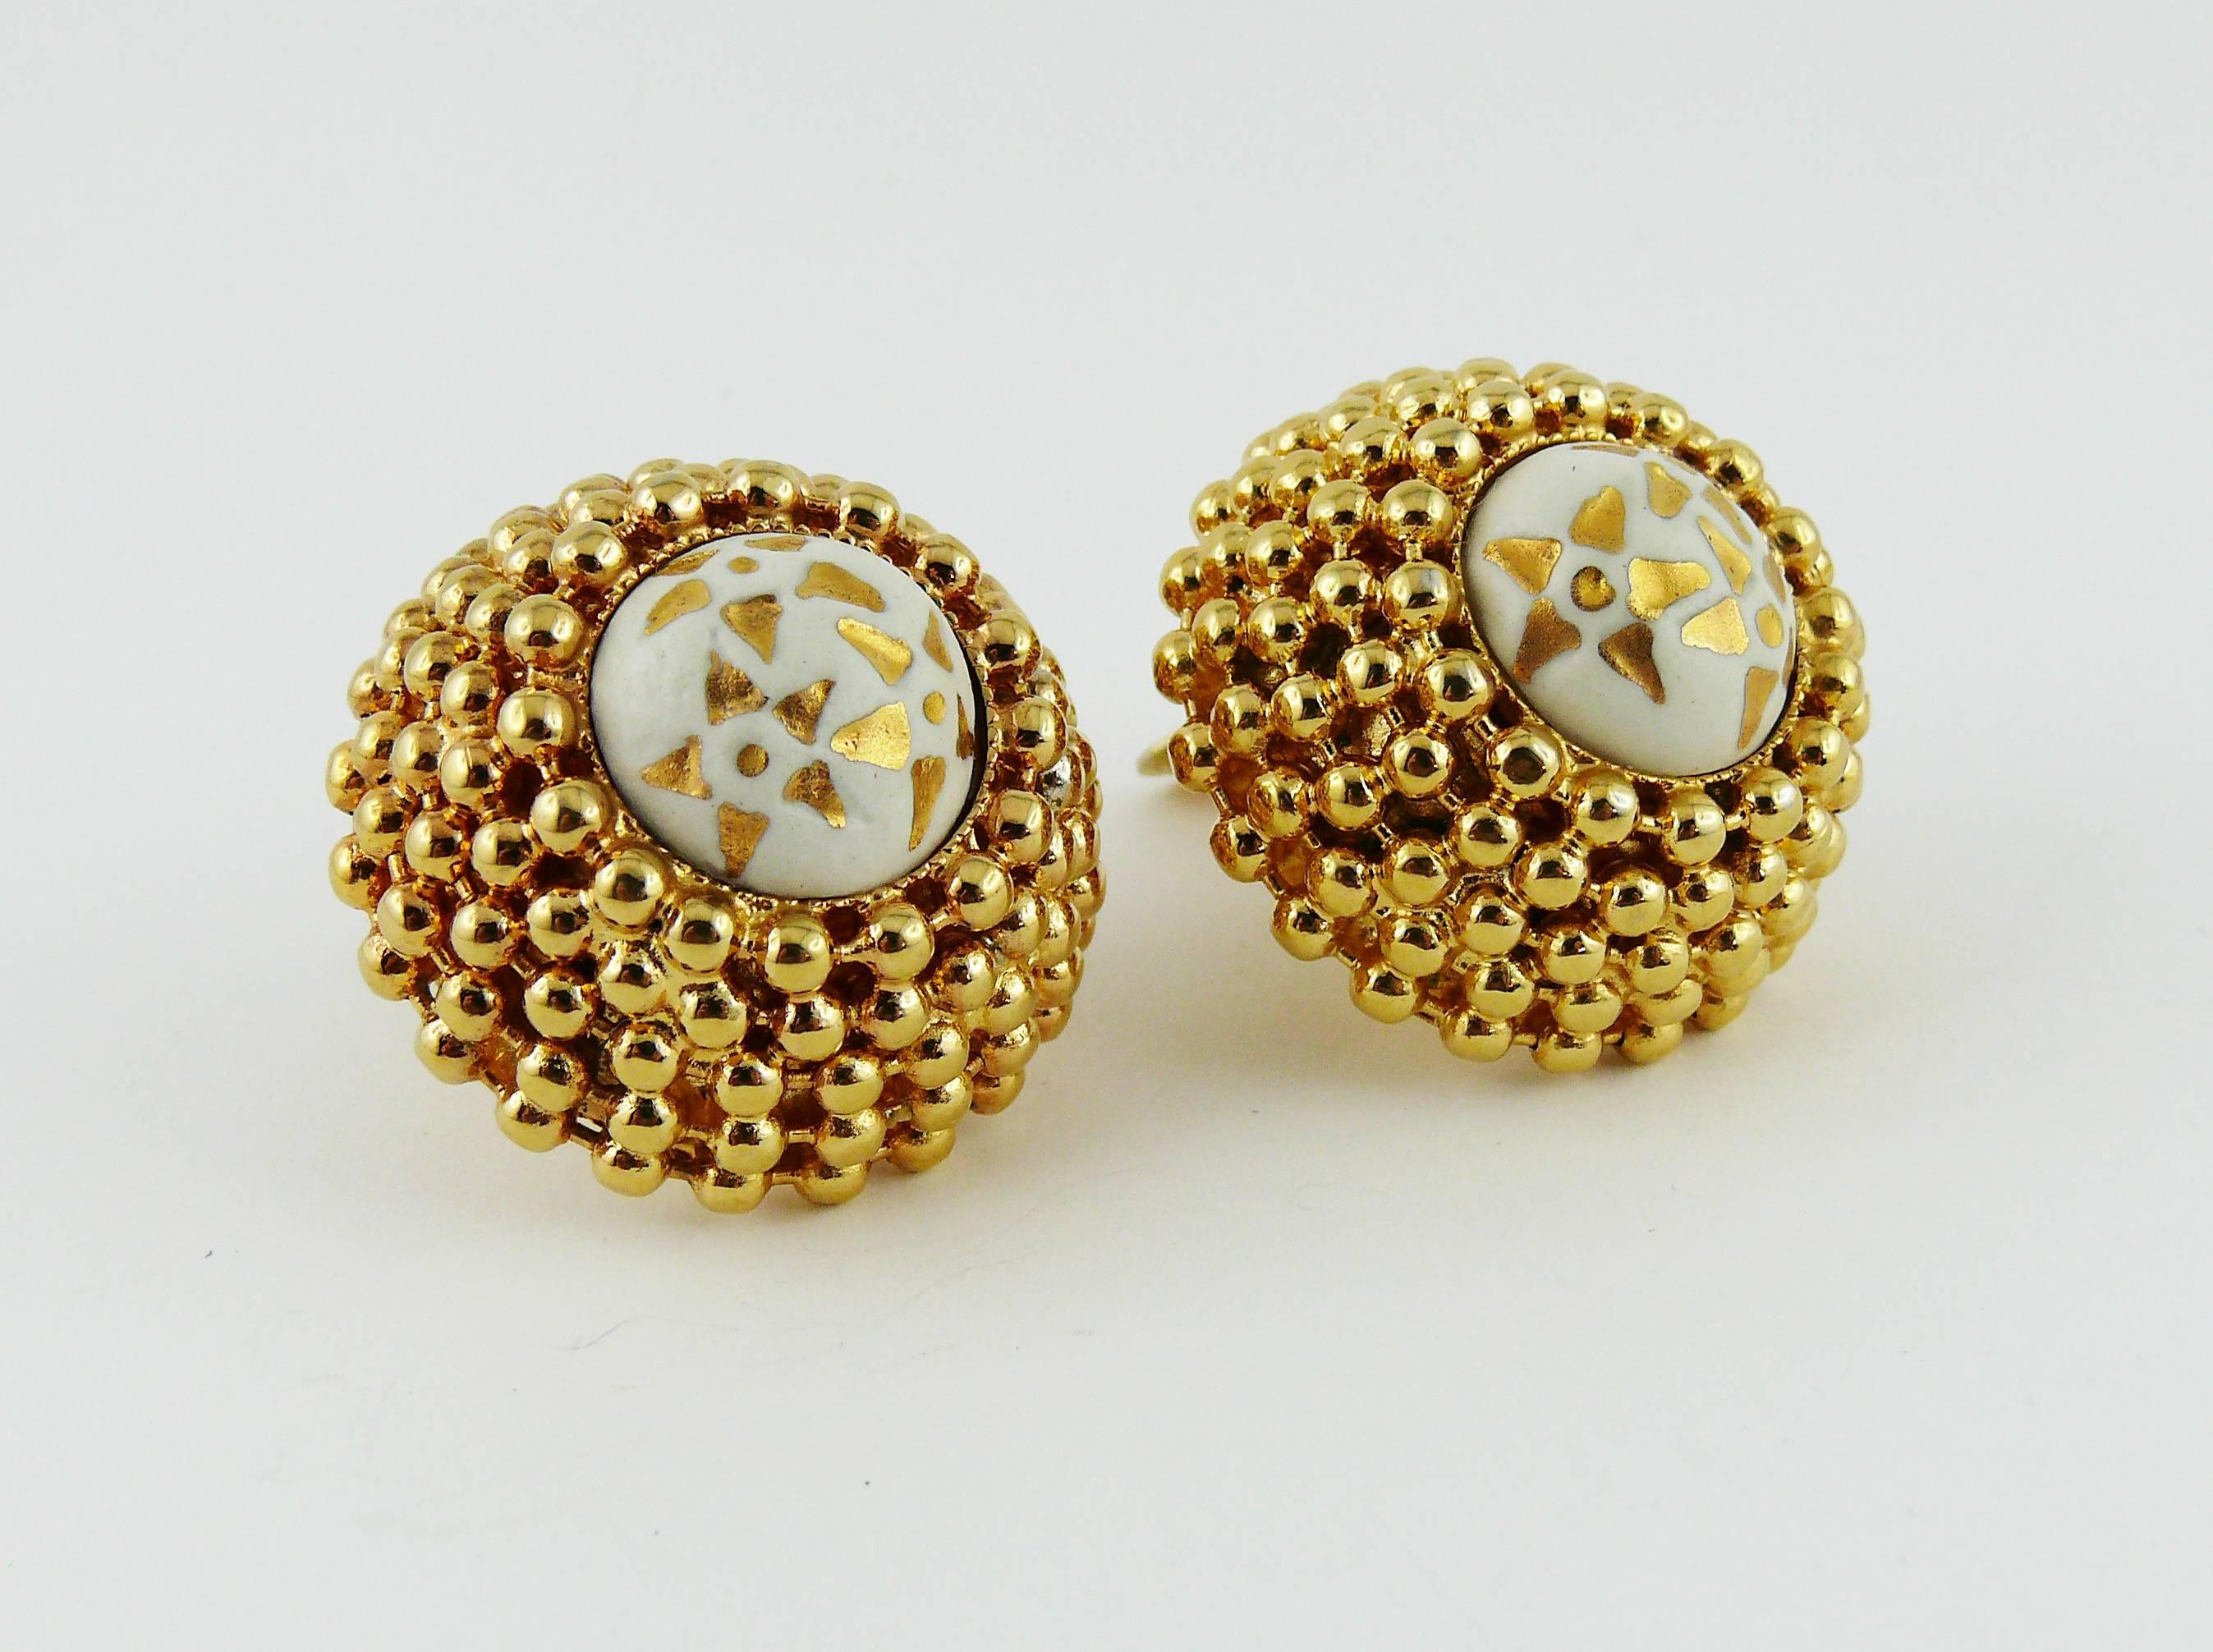 CELINE Paris vintage 1989 large gold tone round domed shape clip-on earrings featuring iconic brand star logo hand painted in gold color on a white ceramic base.

Marked CELINE 89 Made in Italy.

JEWELRY CONDITION CHART
- New or never worn : item is